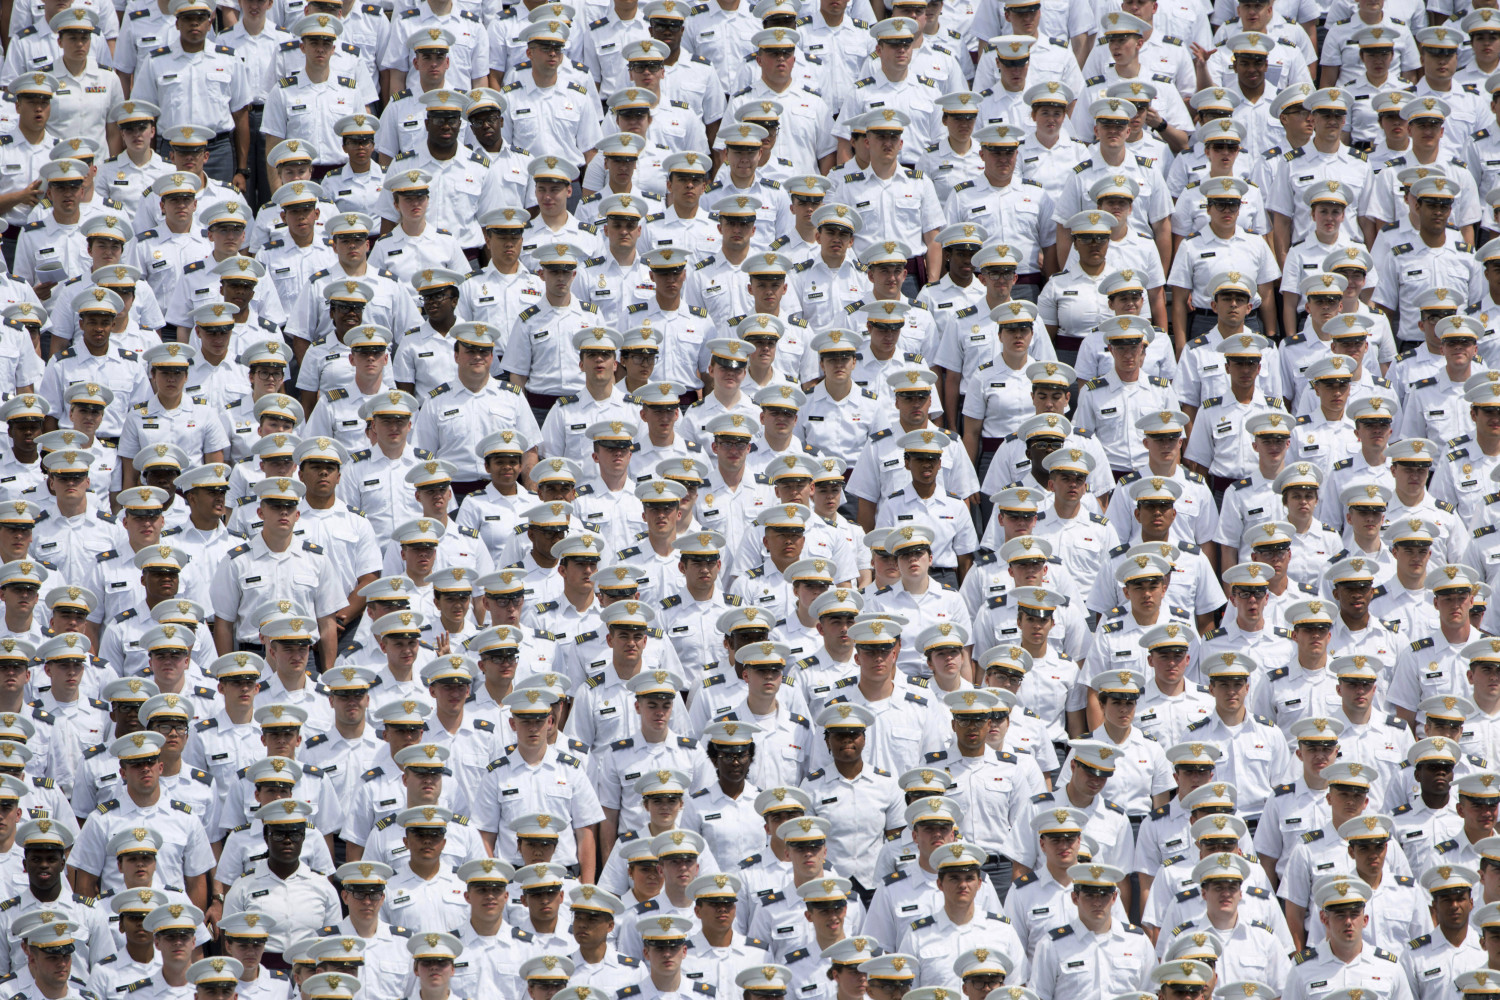 New DOD Report Shows Significant Rise in Sexual Harassment Reports at Military Academies